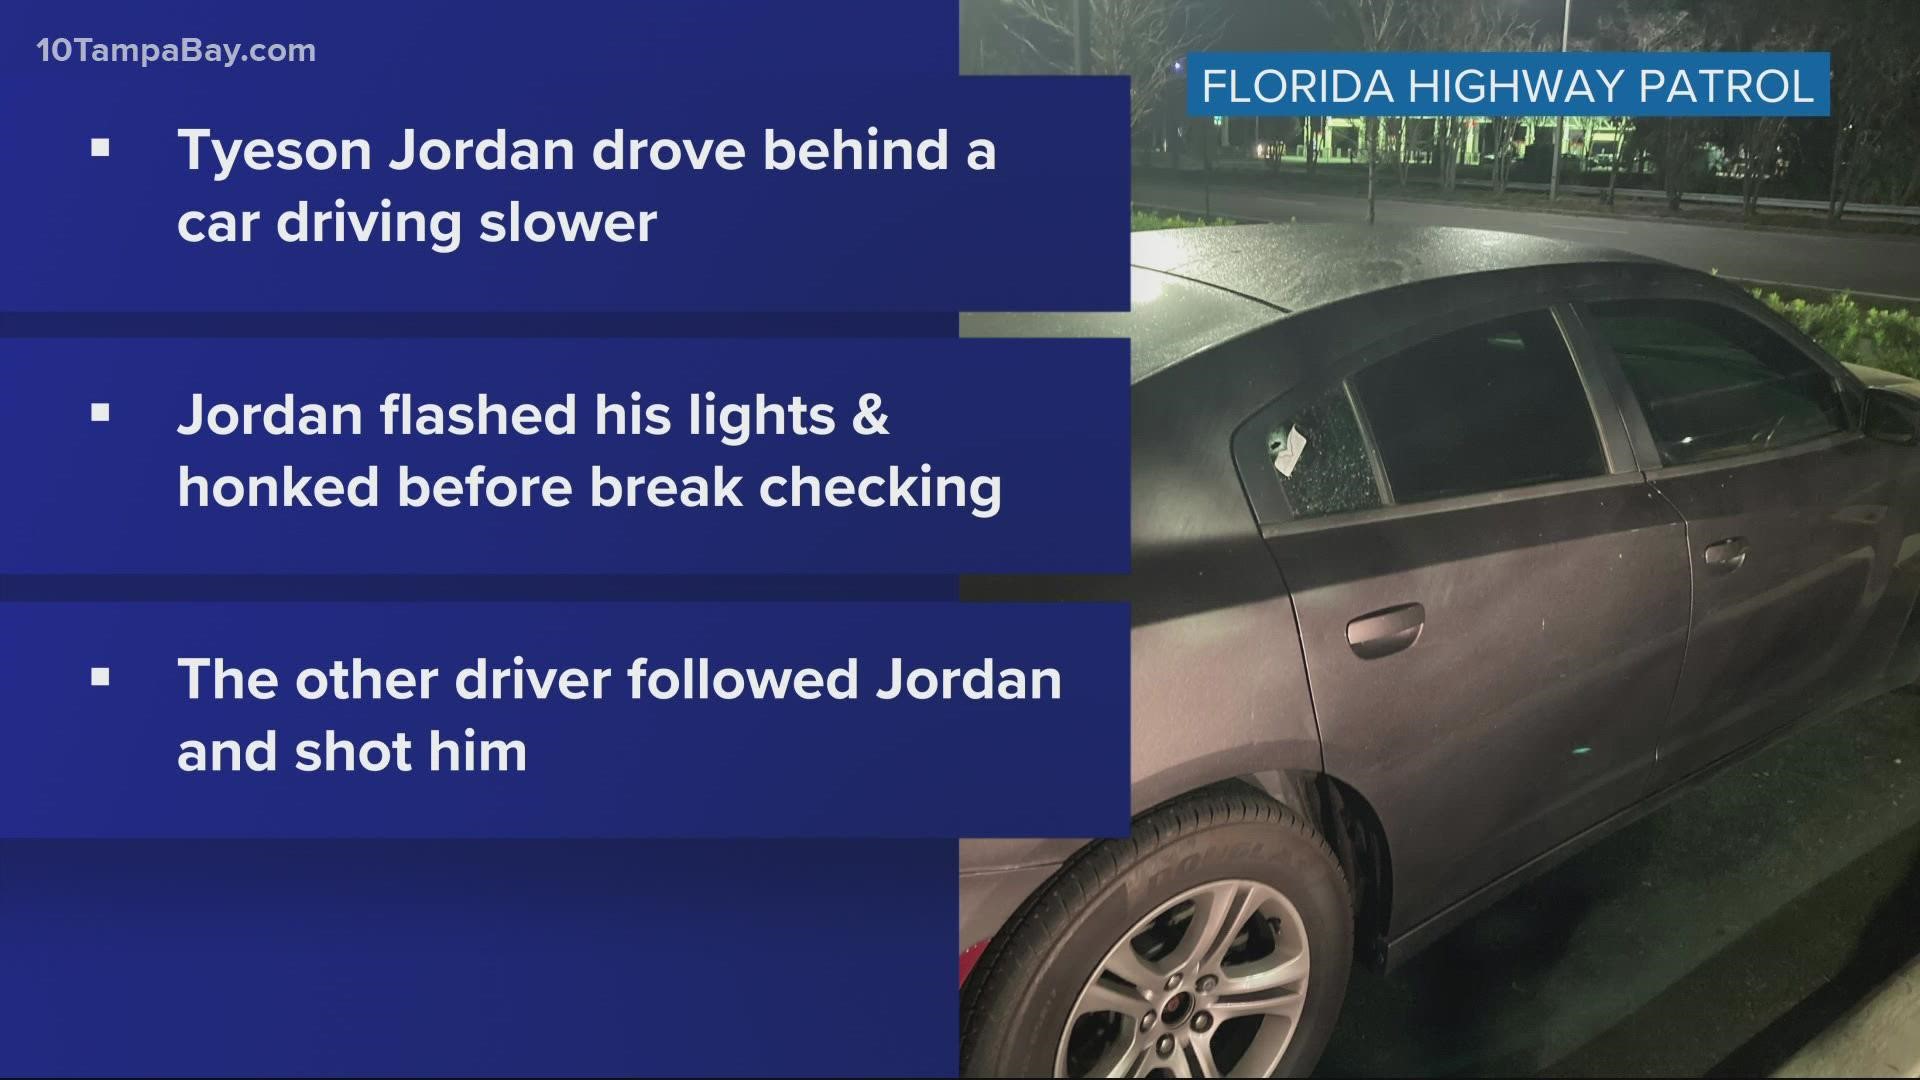 The driver "brake checked" another driver who then followed him before firing shots at his car, Florida Highway Patrol says.